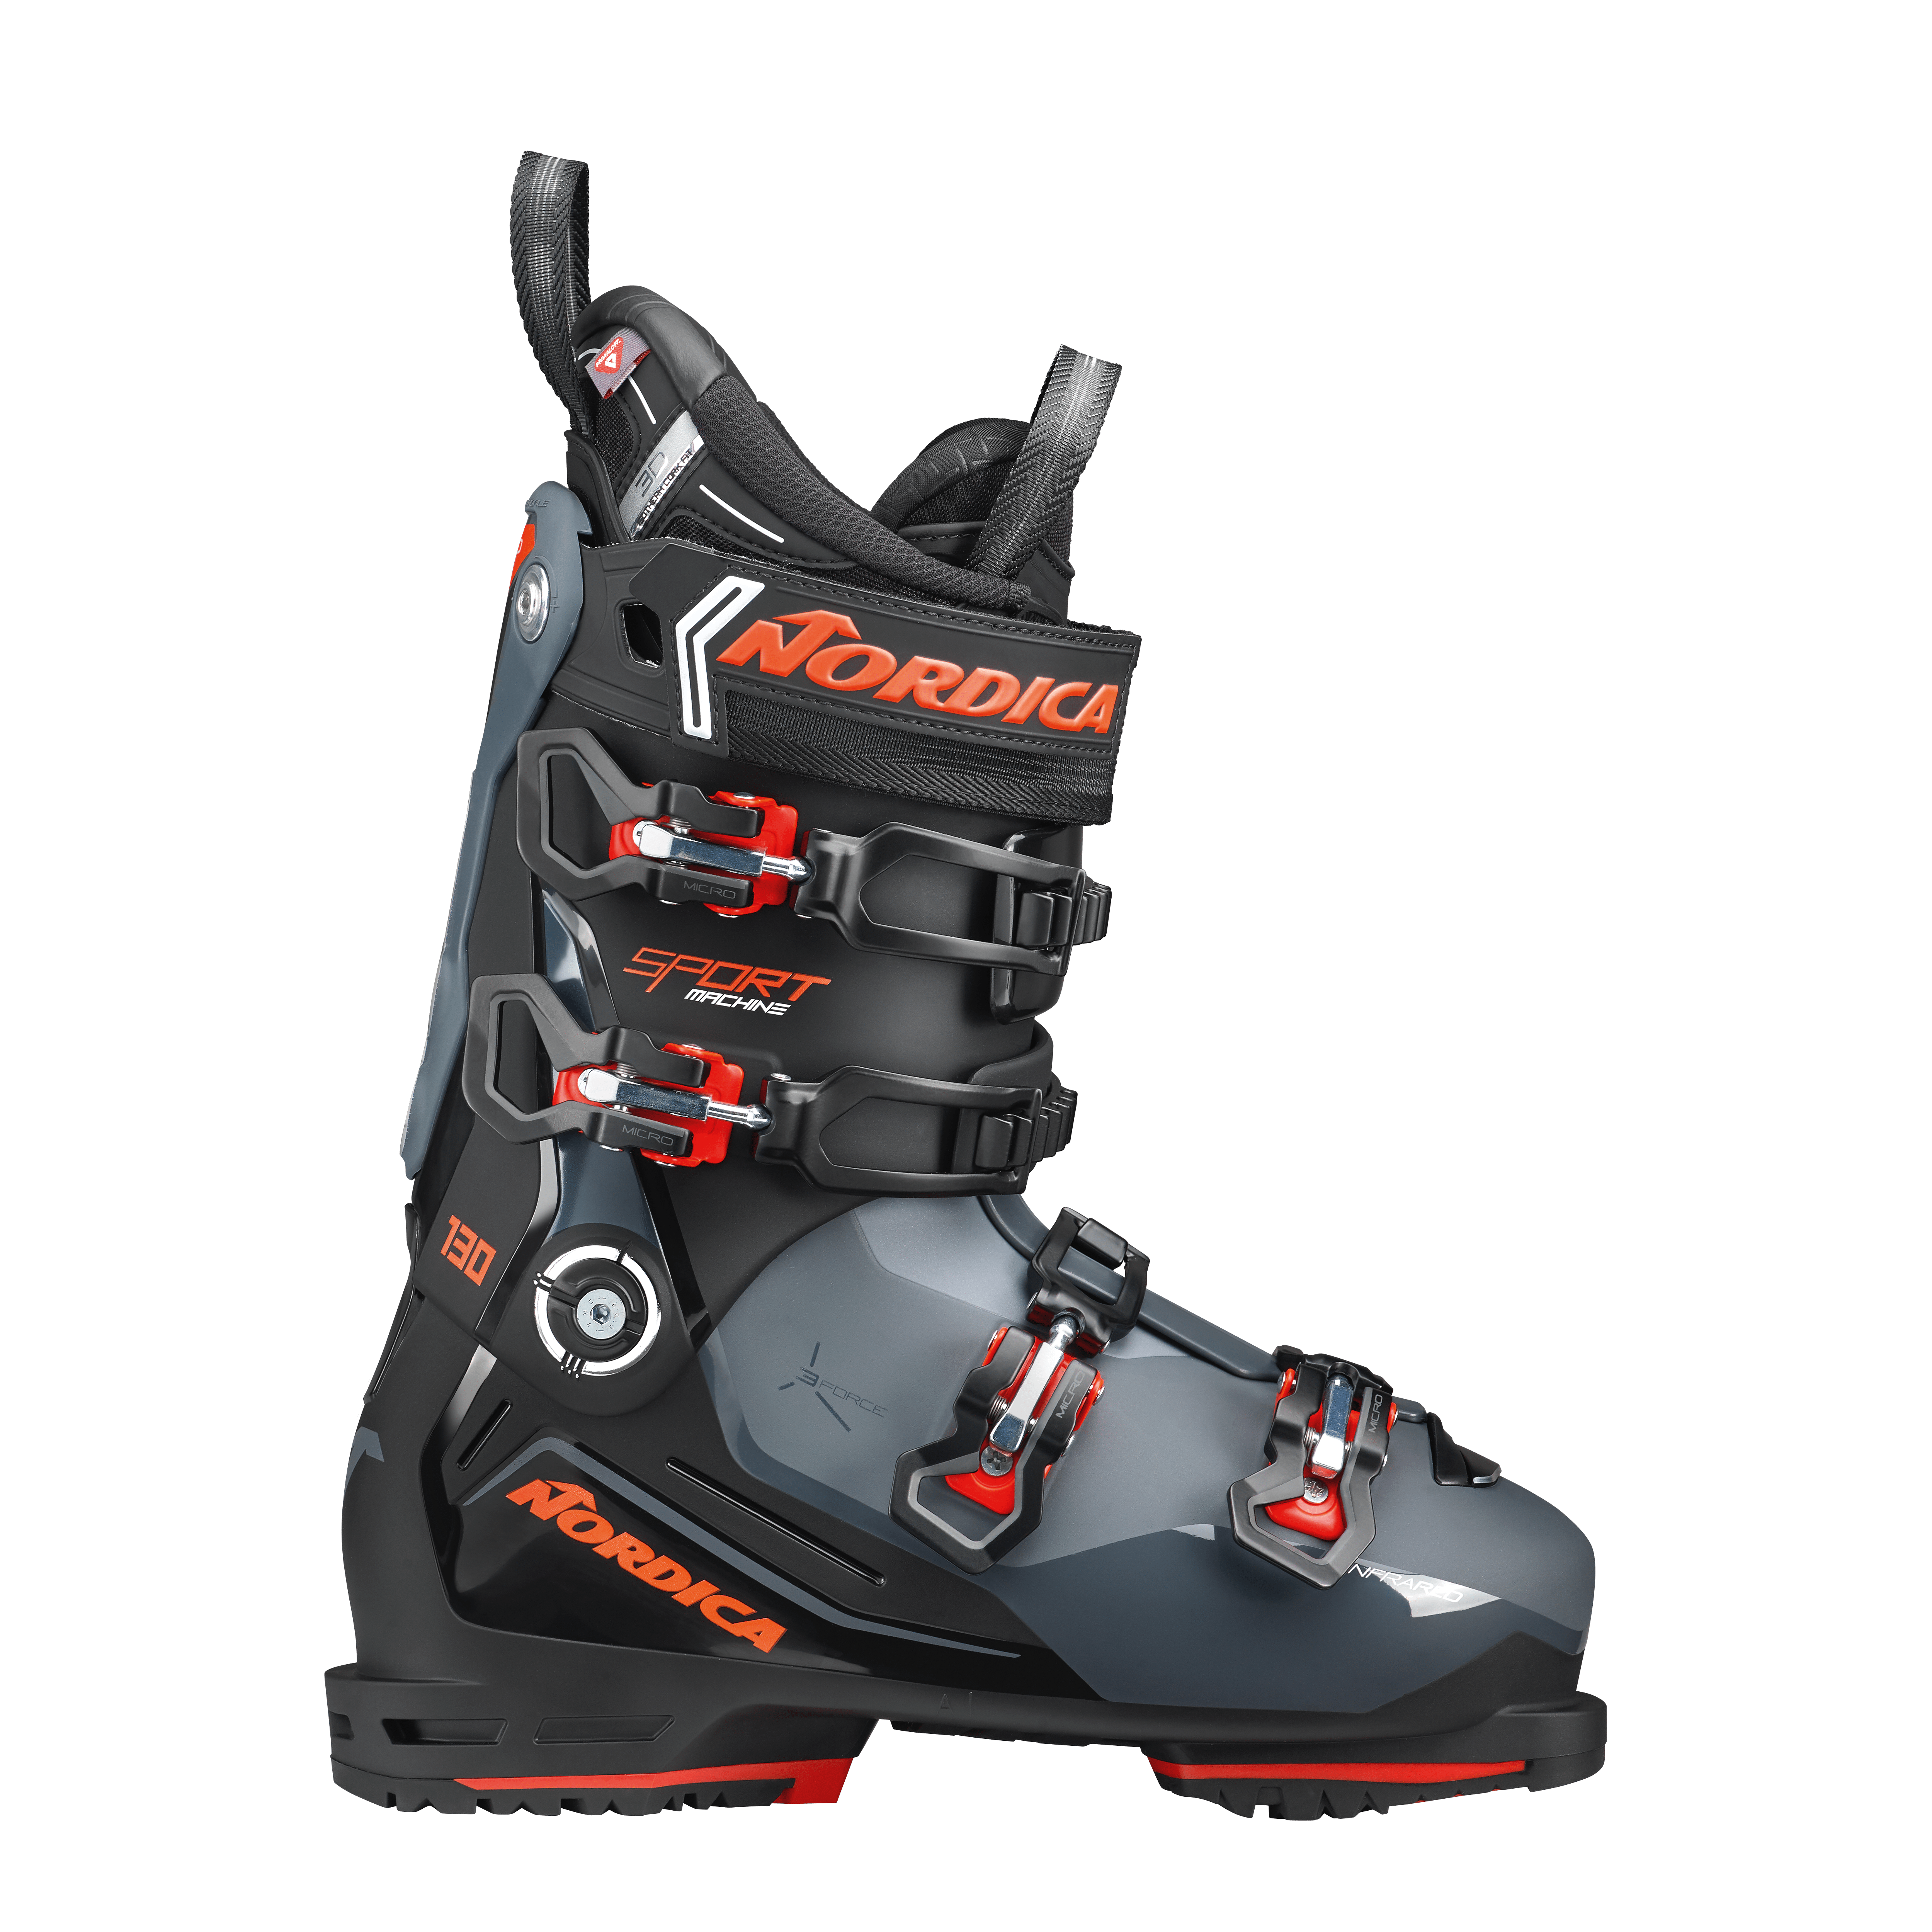 Sportmachine 3 130 (GW) - Nordica - Skis and Boots – Official website